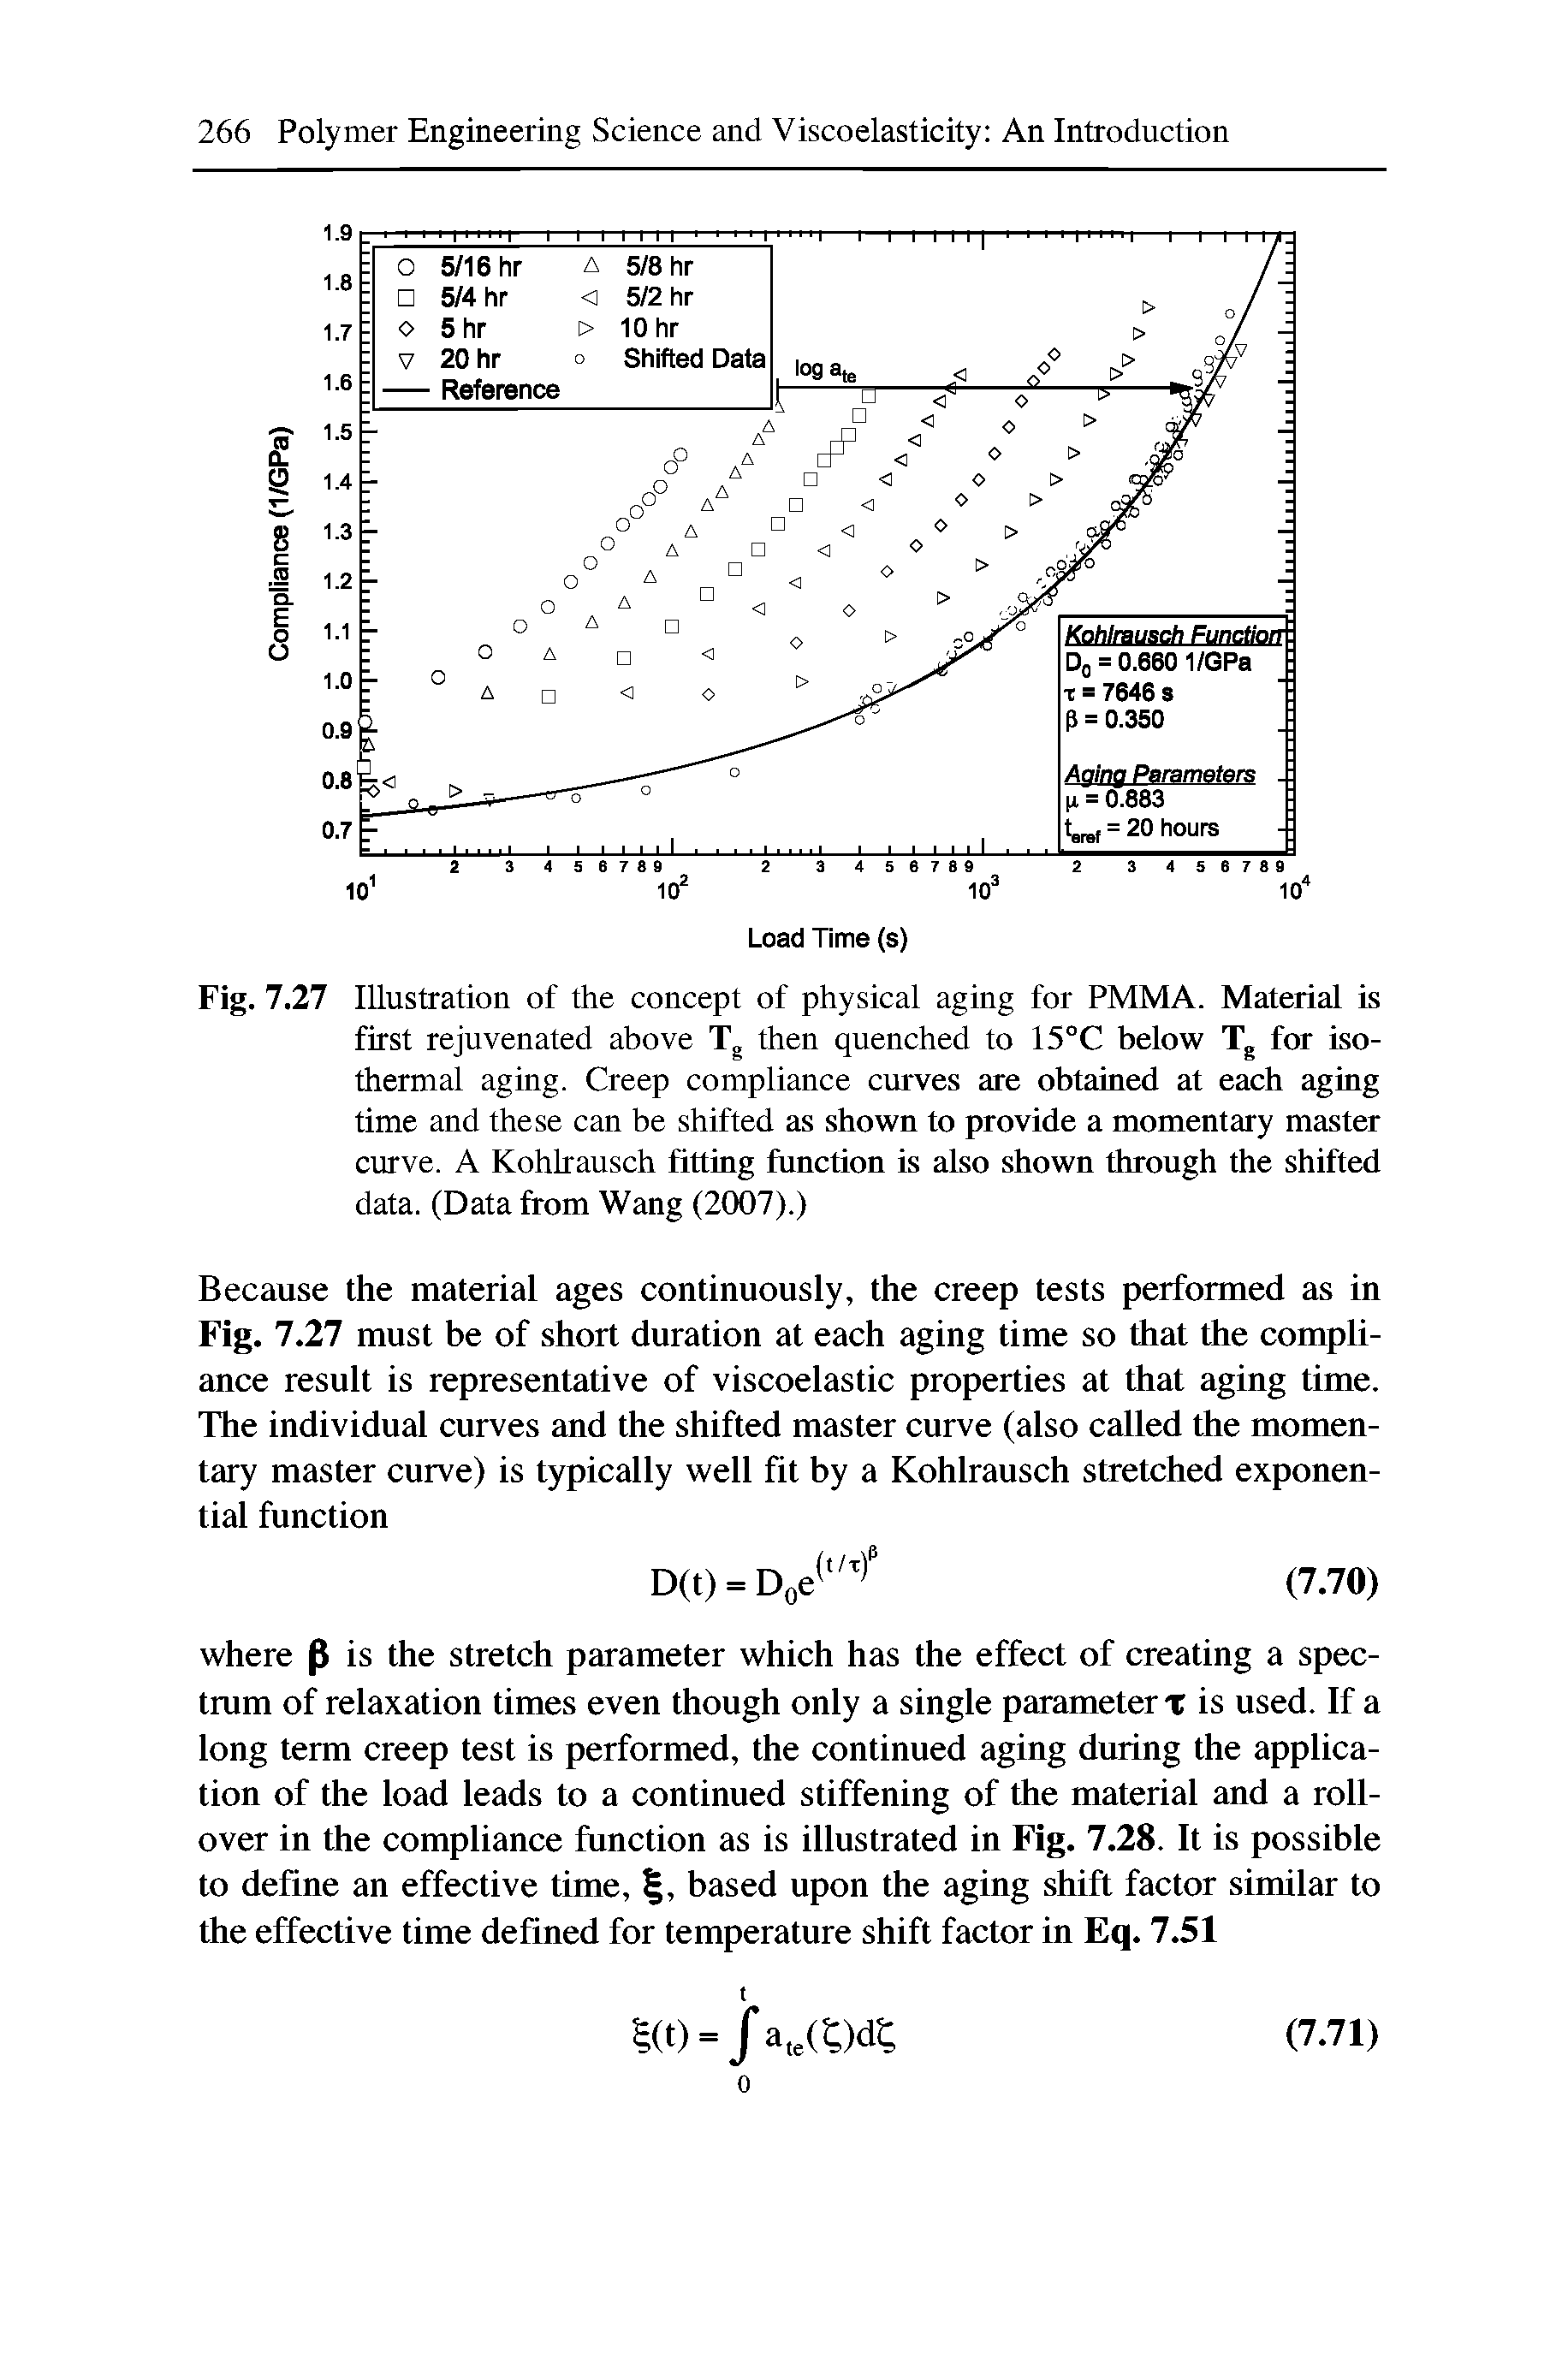 Fig. 7.27 Illustration of the concept of physical aging for PMMA. Material is first rejuvenated above Tg then quenched to 15°C below Tg for isothermal aging. Creep compliance curves are obtained at each aging time and these can be shifted as shown to provide a momentary master curve. A Kohlrausch fitting function is also shown through the shifted data. (Data from Wang (2007).)...